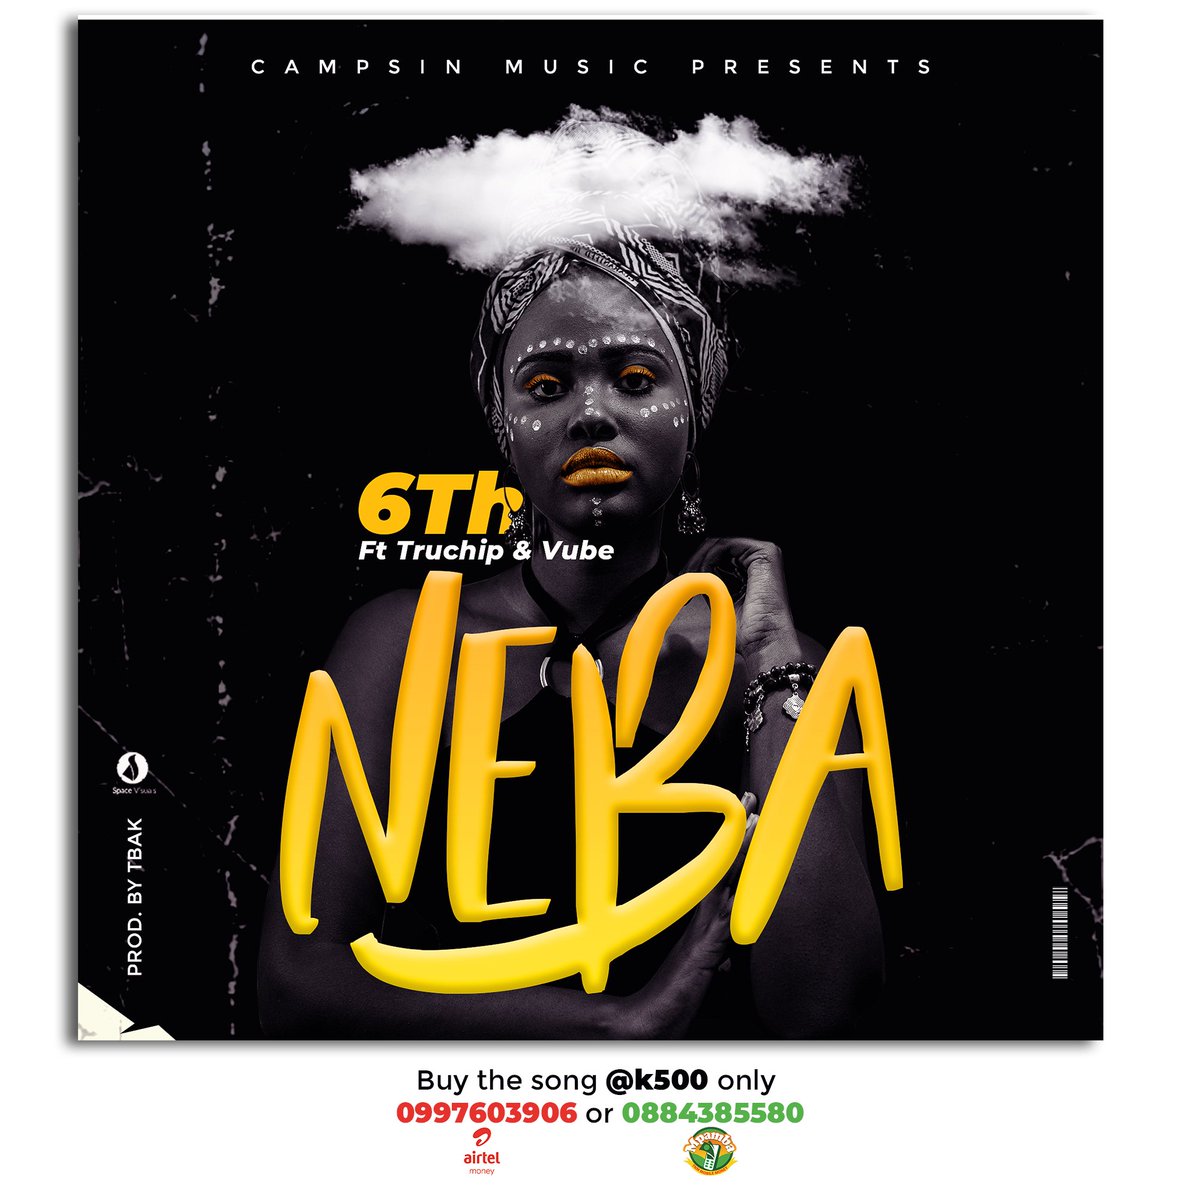 _HELLO MW🗣🗣🗣
help to buy our new song #NEBA 
🙏😭
(0997603906)(0884385580)
the song will also be premiered on radio2 born n bred tonight !
dont miss n dont forget to support malawi music🙏
cc.@xkeshofficial @HenryCzarmw @Quest265 @GwambaOfficial @AlipoAndrewsII @trixie_beyank